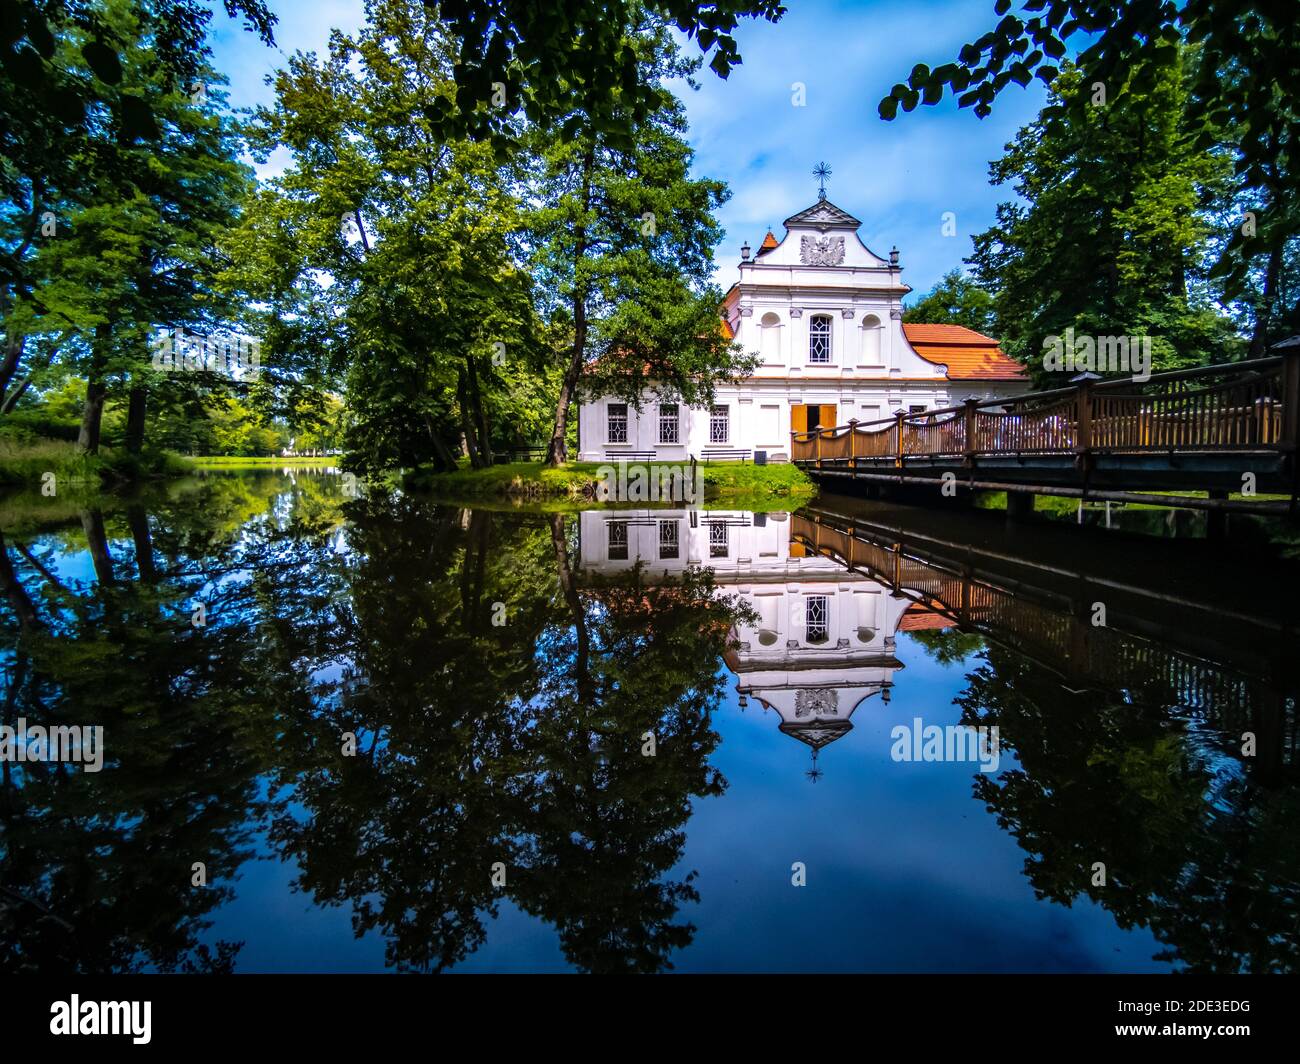 On a small island of the city pond, a small church has been built that provides a mirror image. Stock Photo